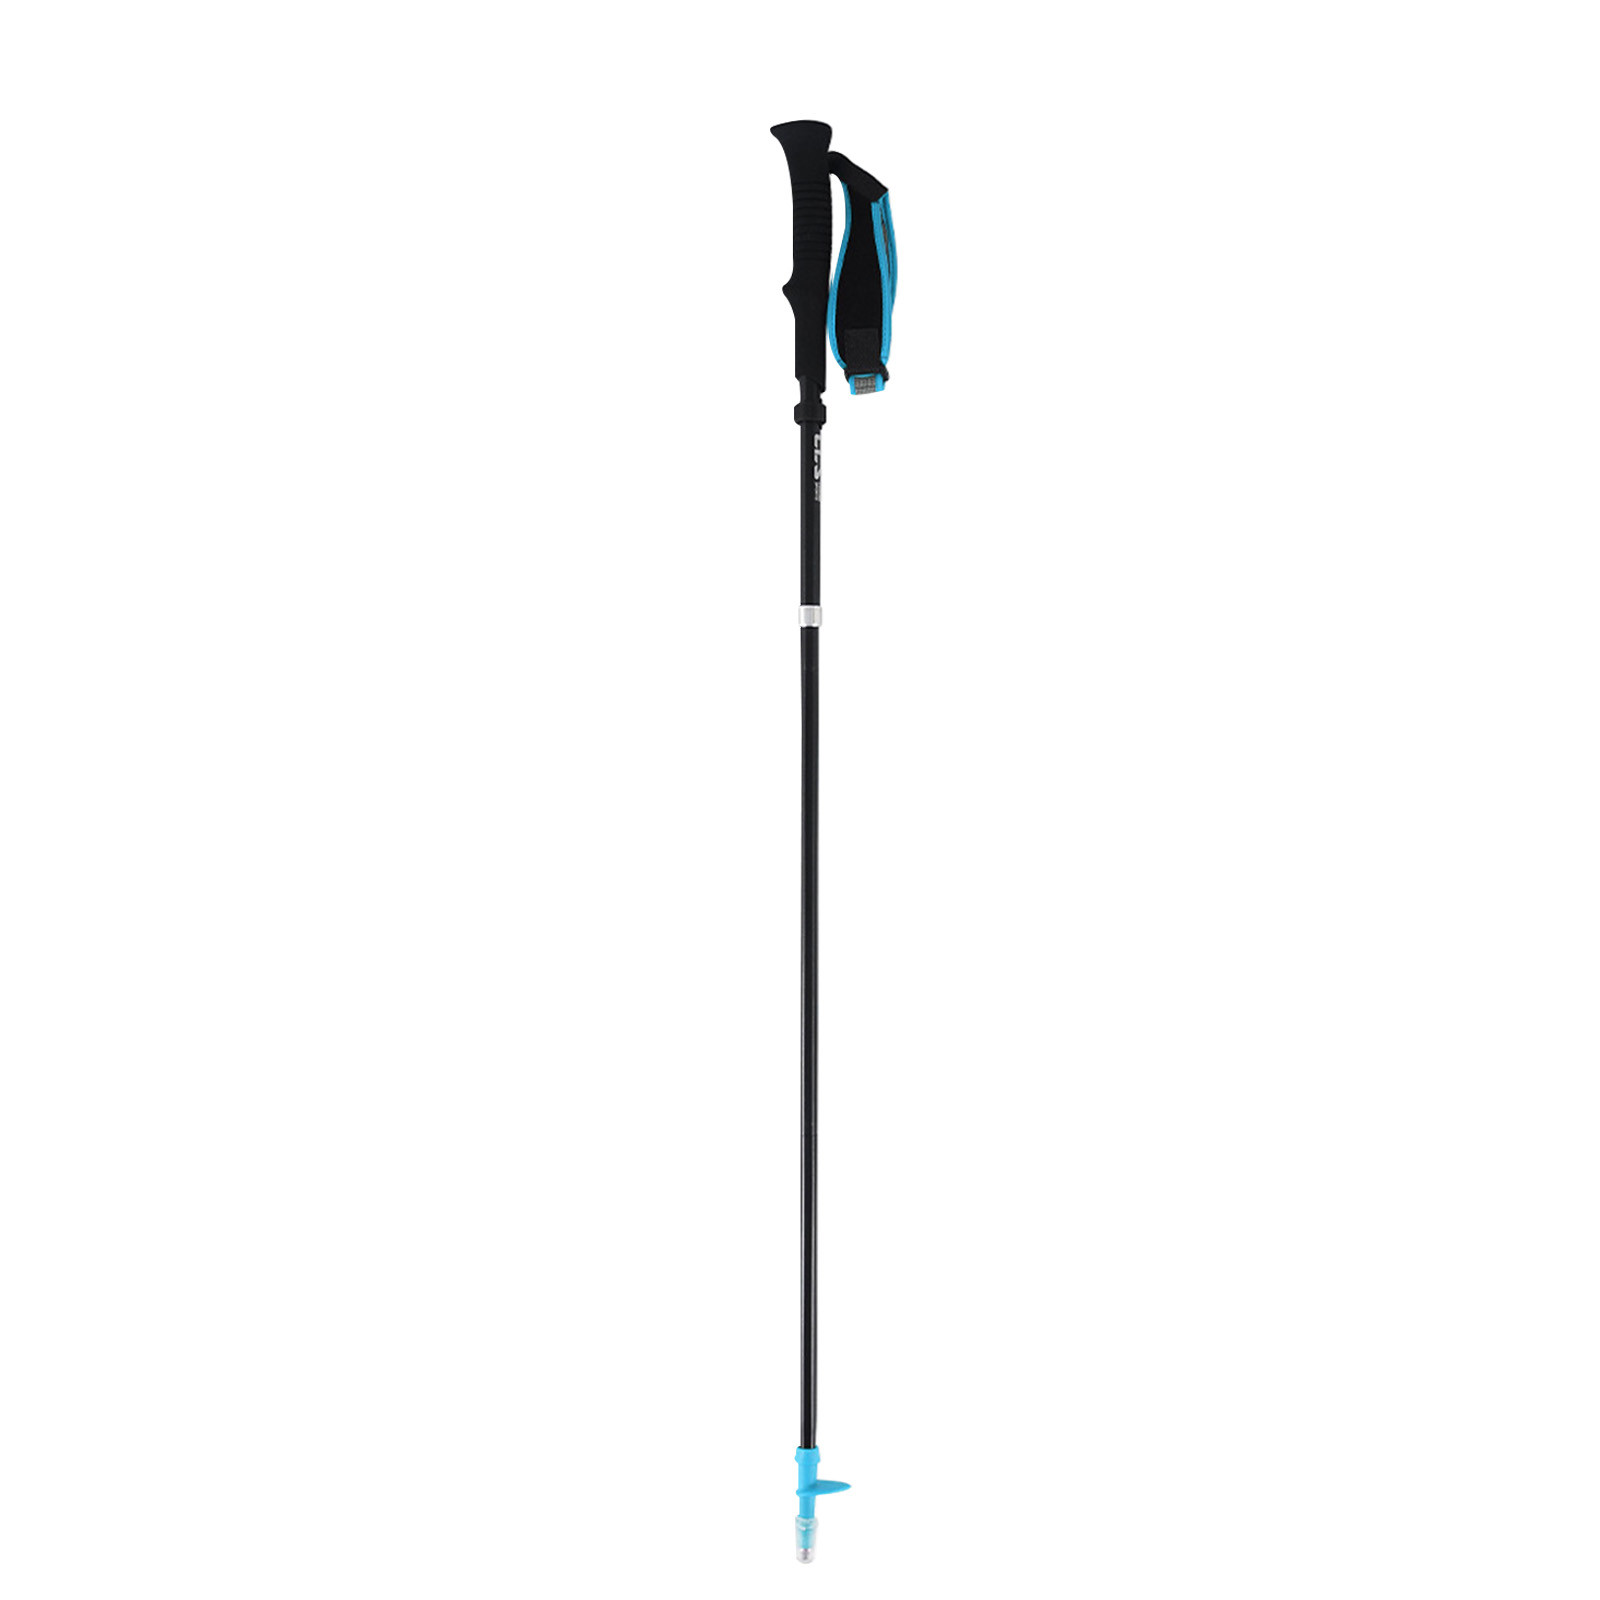 Do trekking poles really make a difference?